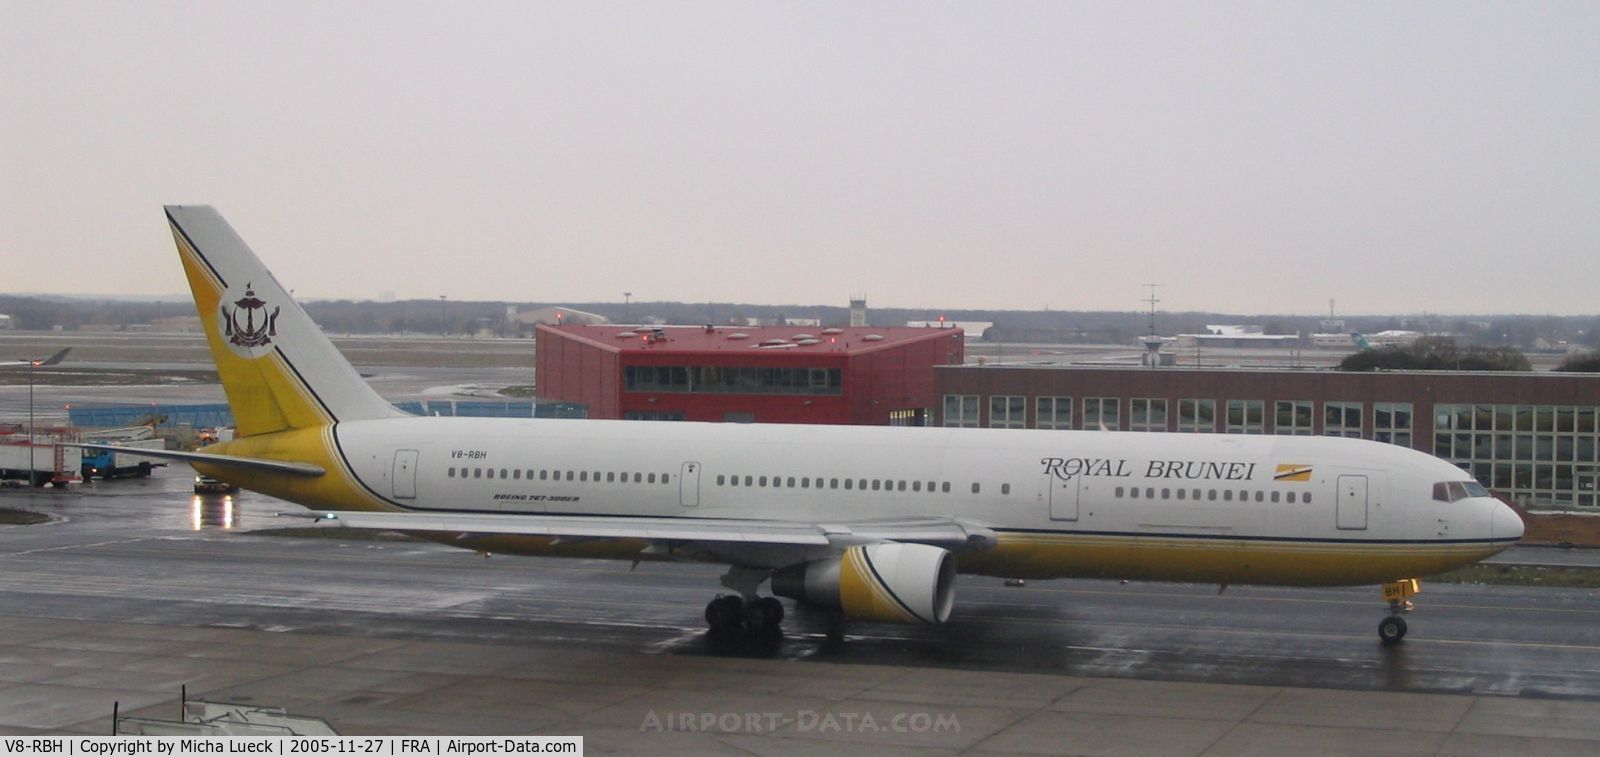 V8-RBH, 1993 Boeing 767-33A/ER C/N 25534/477, Royal Brunei's jets are said to have golden water taps...